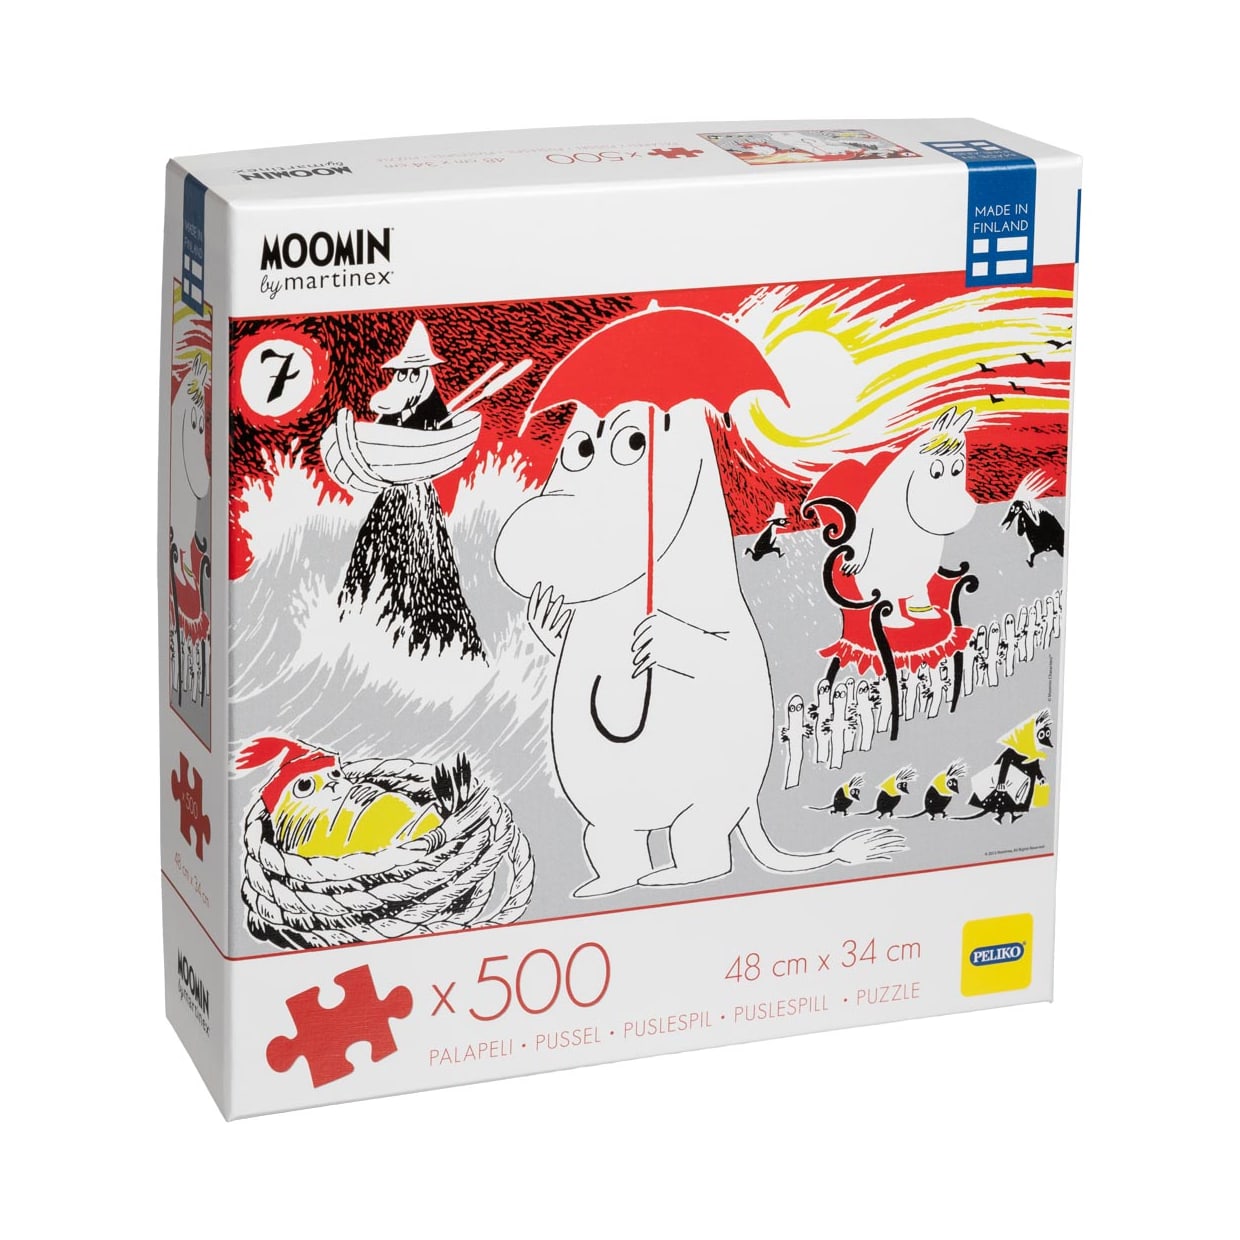 Moomin Jigsaw Puzzle 500 Pieces